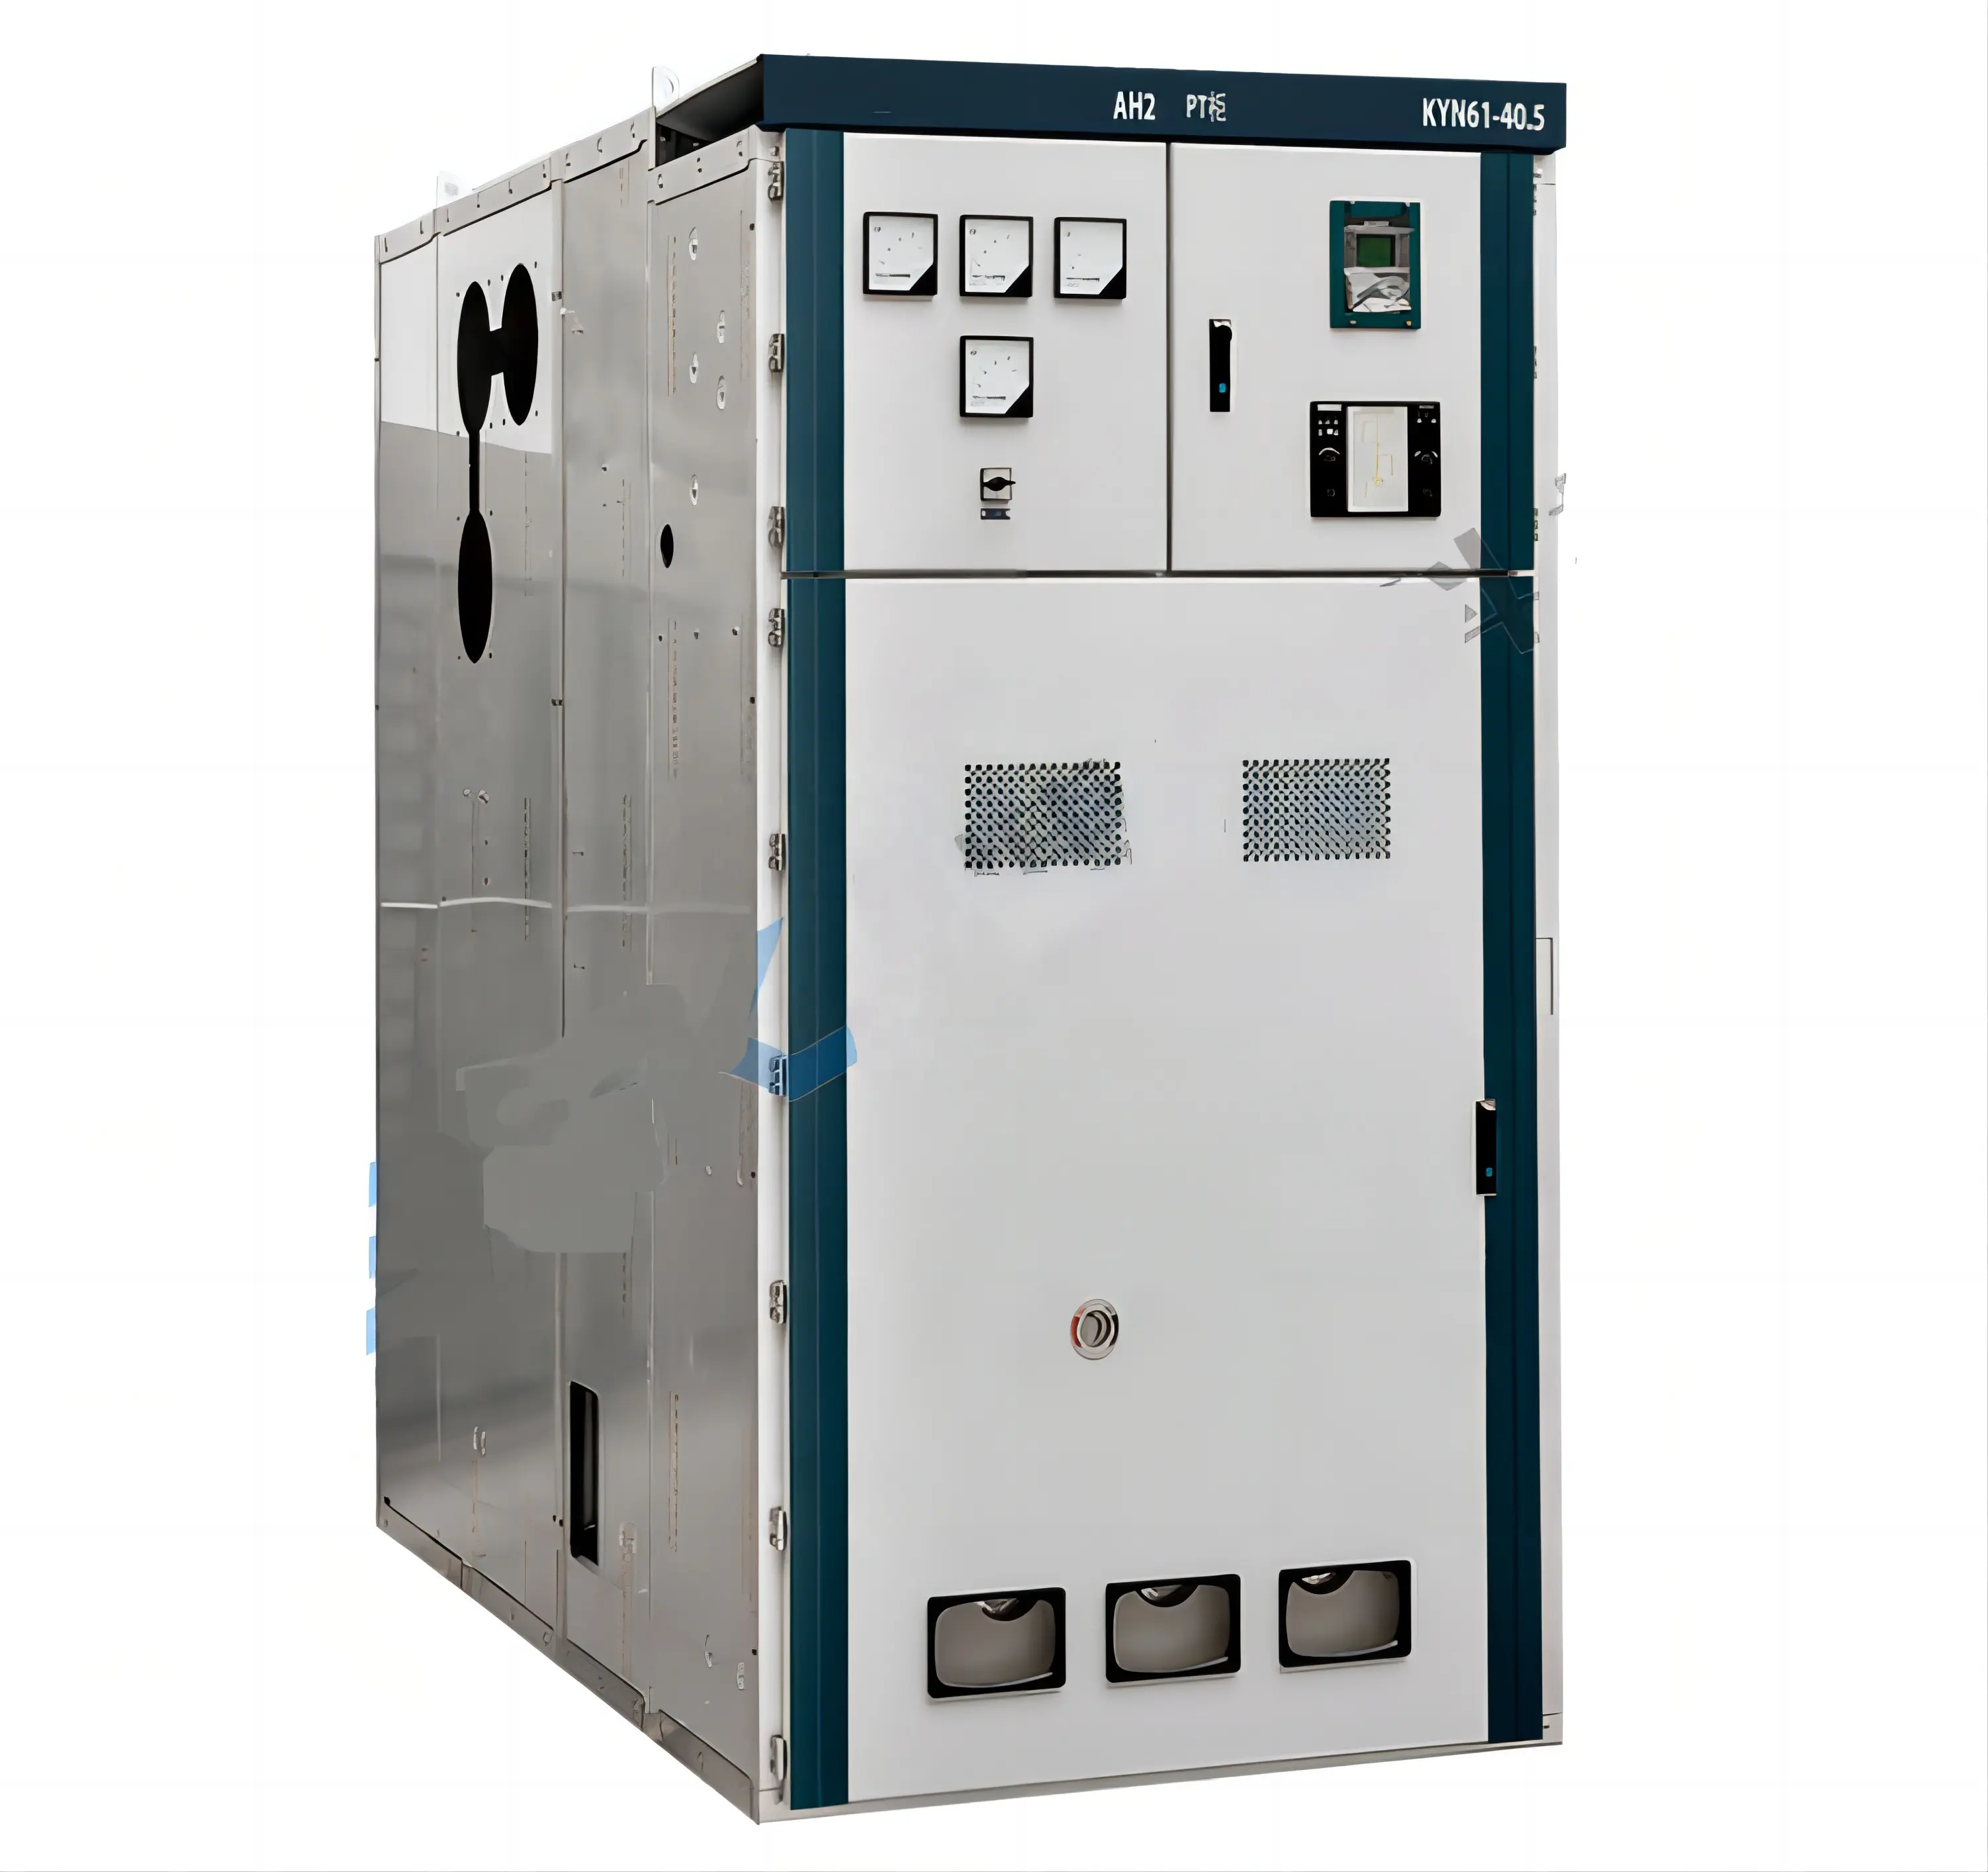 Outdoor medium high voltage mv metal enclosed electrical wire cable rmu switchgear compact equipment iec 62271-200